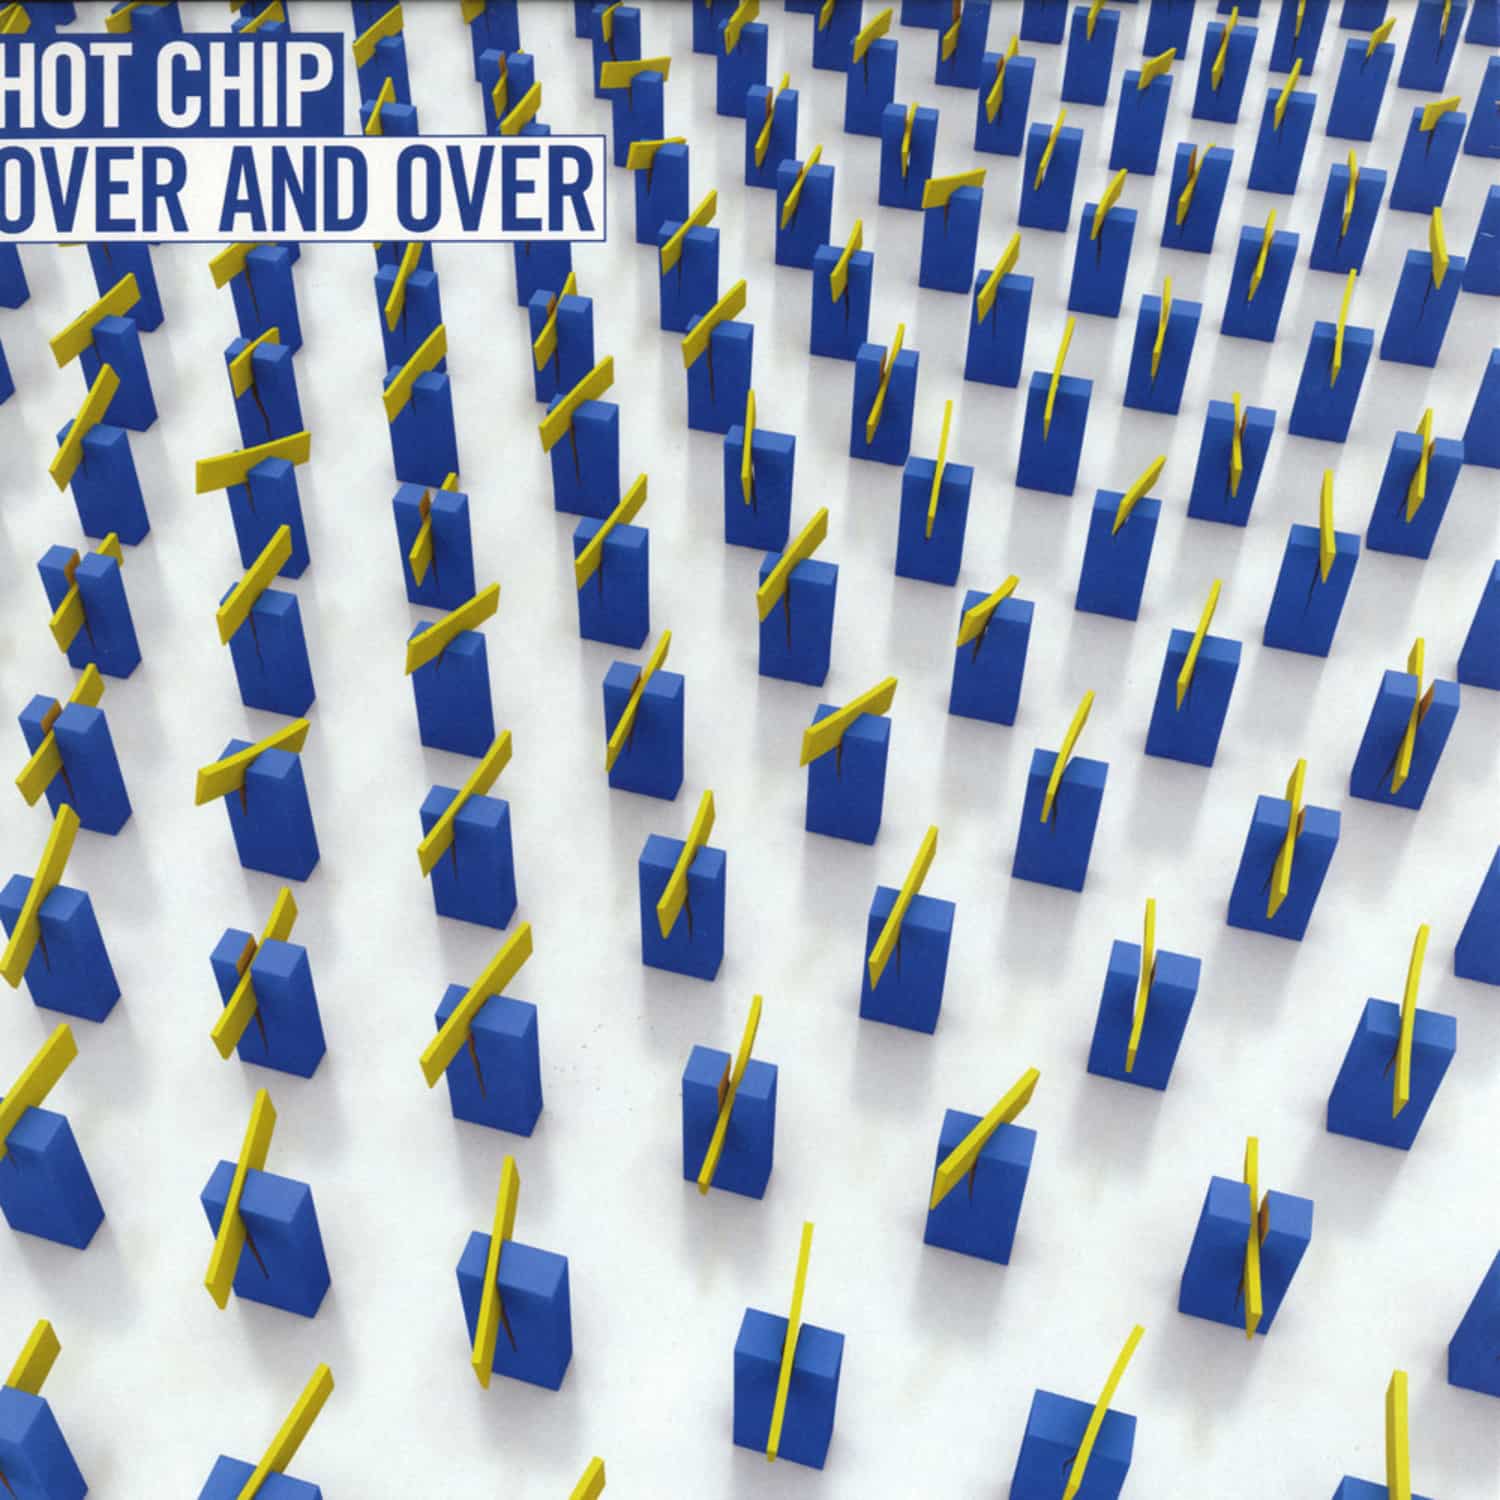 Hot Chip - OVER AND OVER